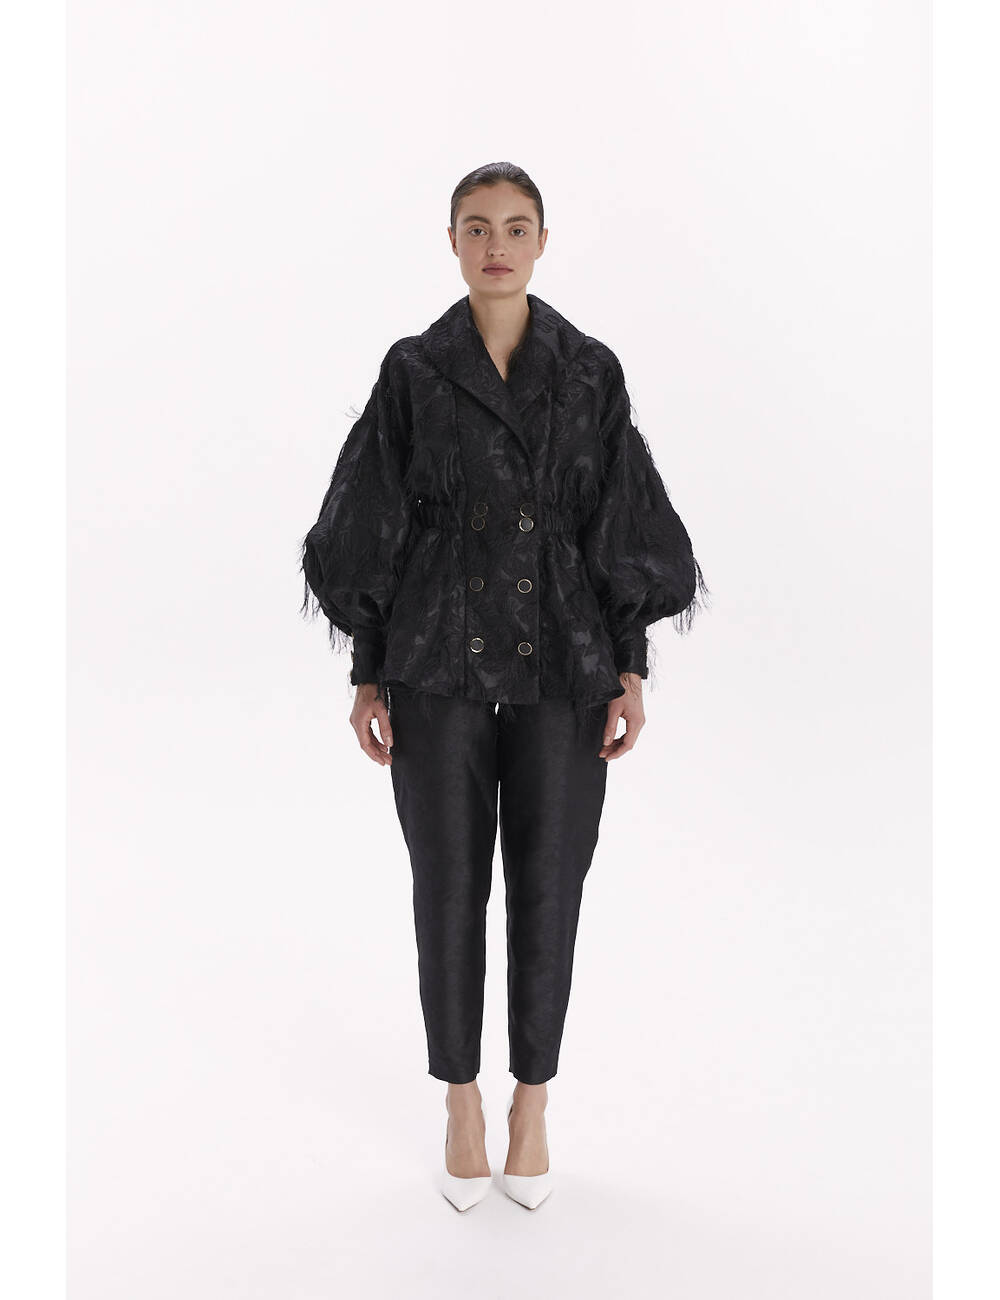 AW23WO LOOK 43 BLACK BLOUSE